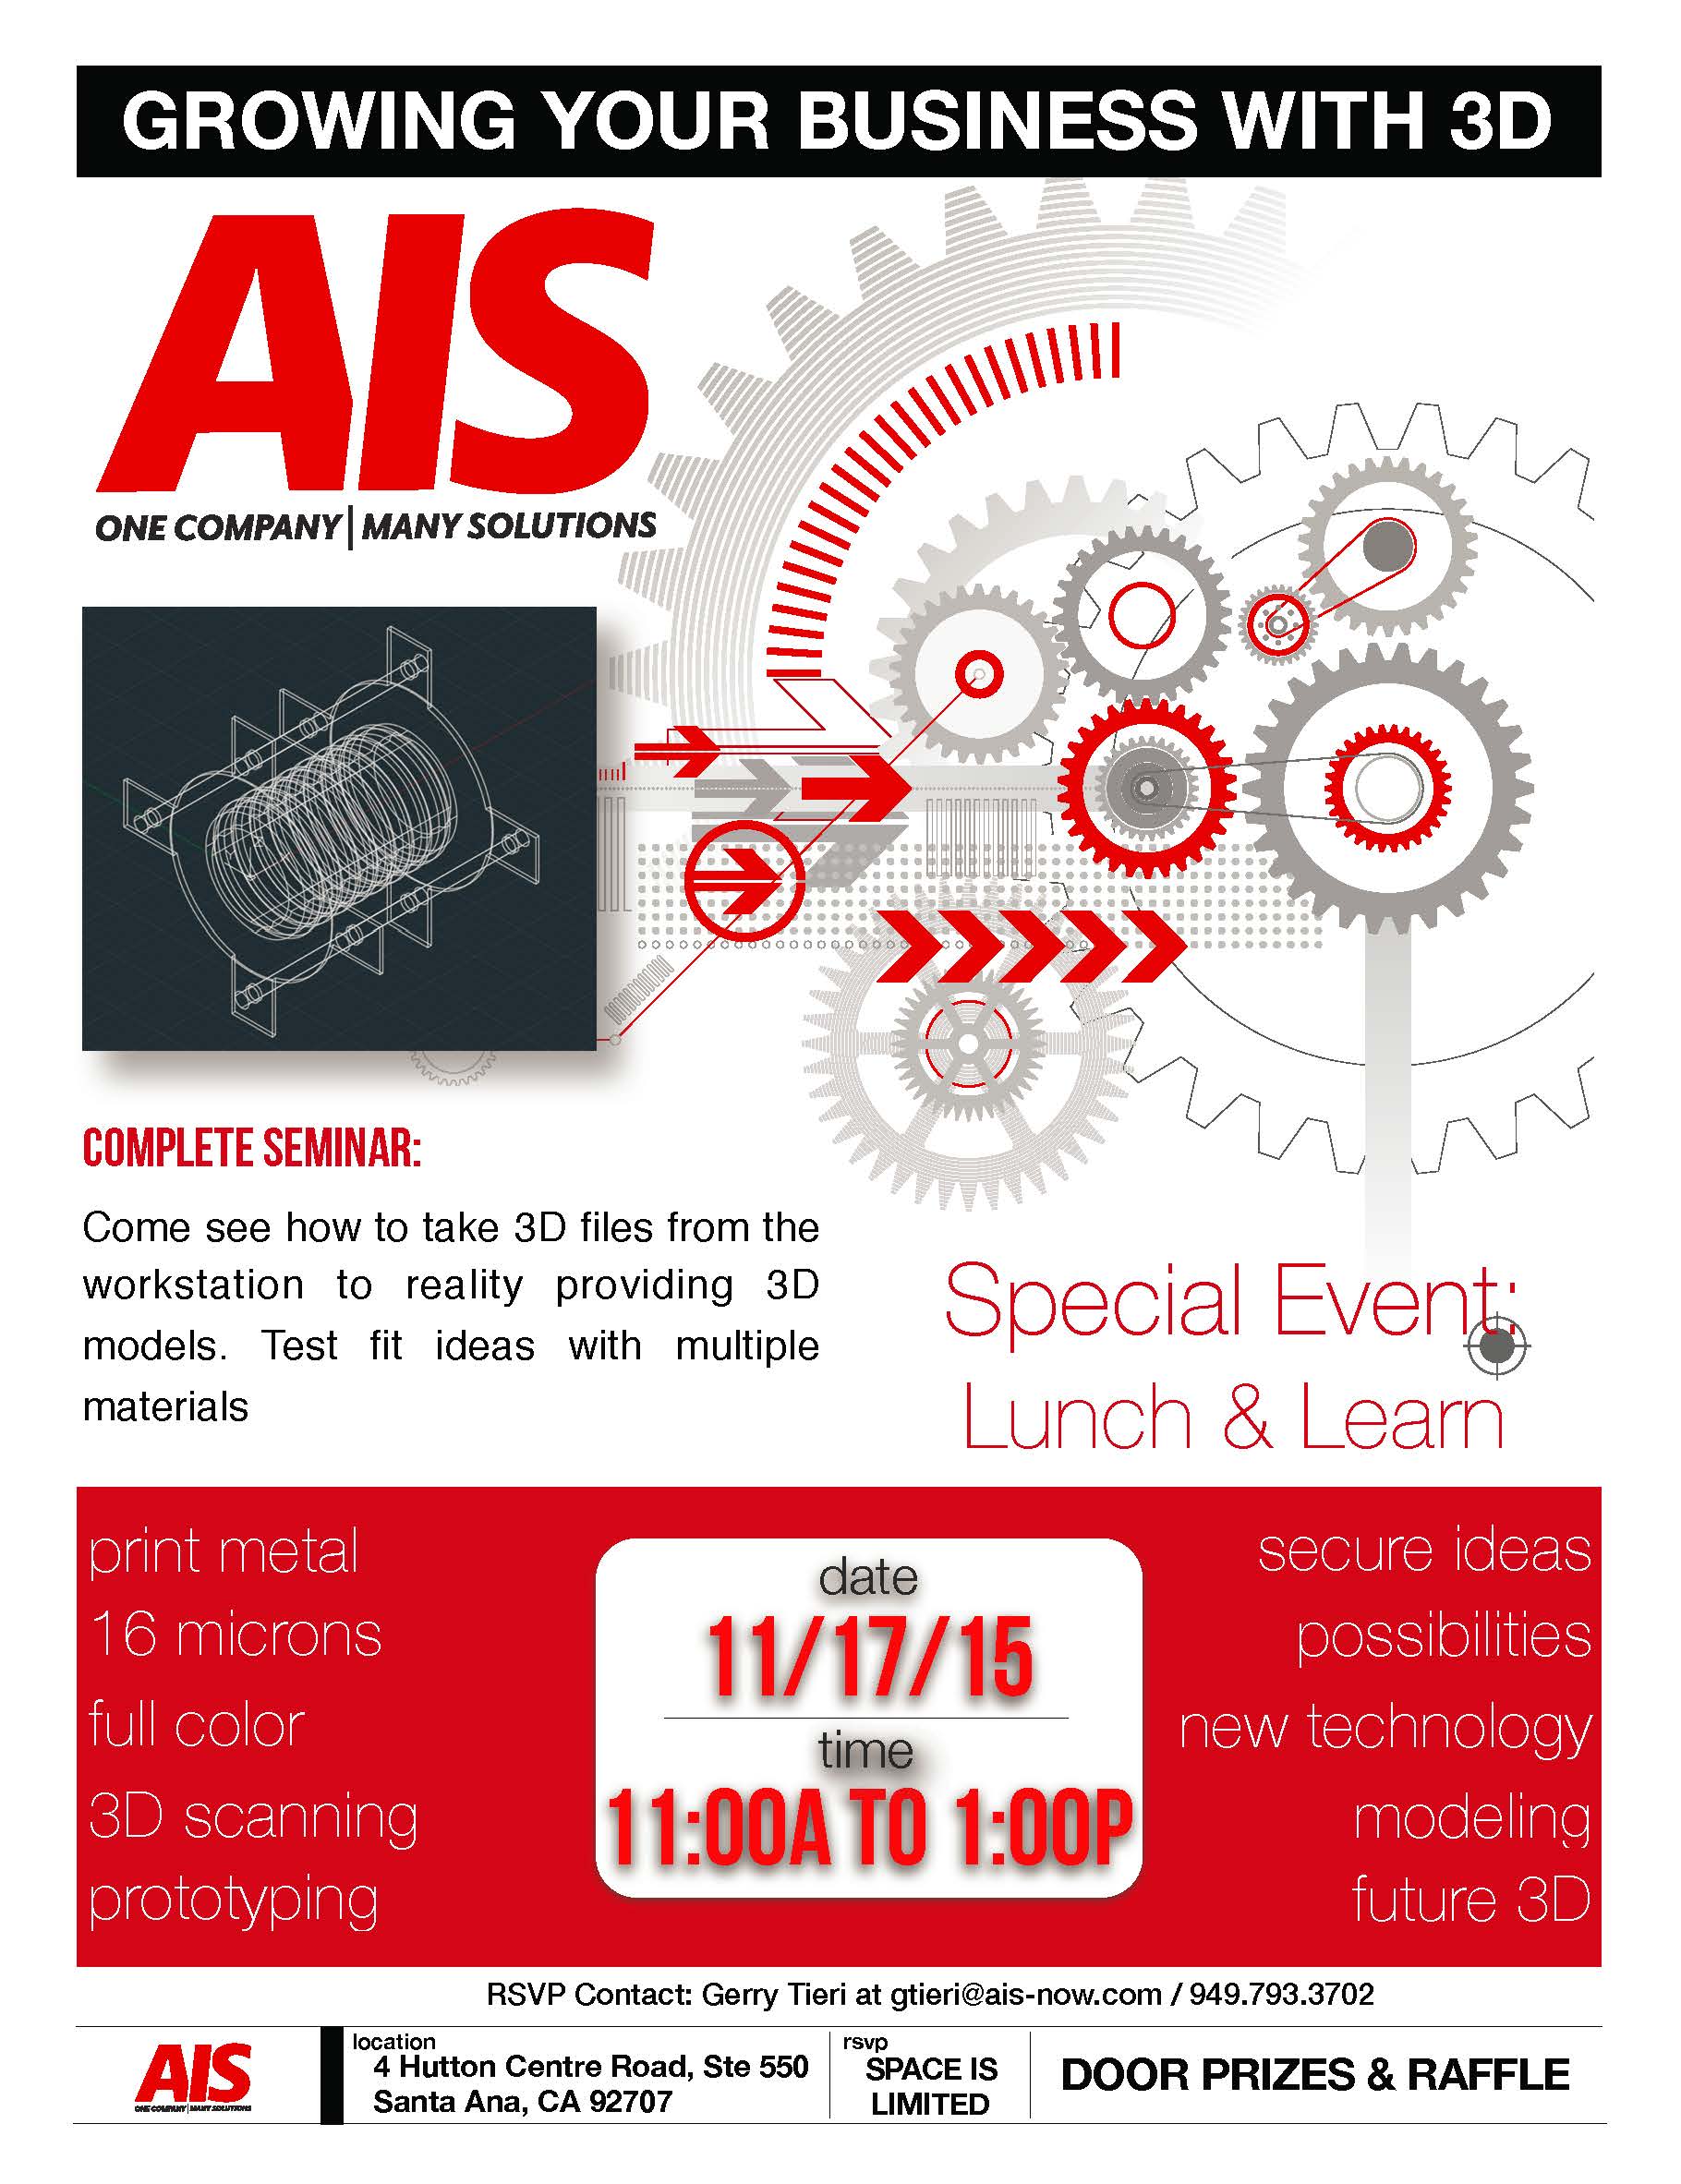 AIS 3D Printing Launch and Learn Event